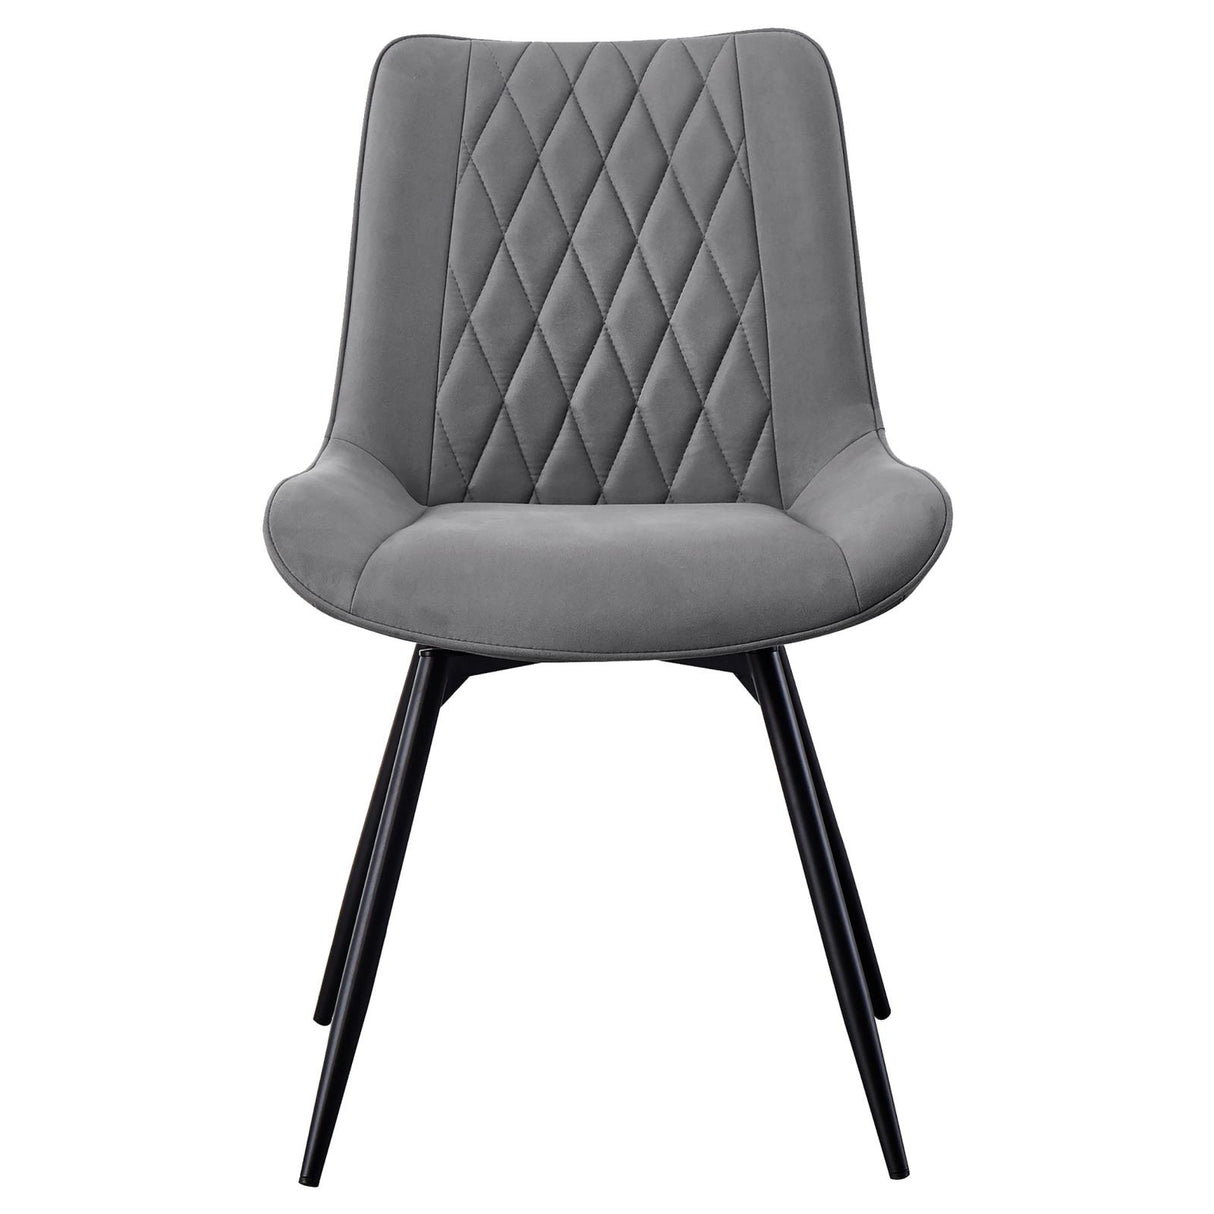 Diggs Upholstered Tufted Swivel Dining Chairs Grey and Gunmetal (Set of 2) - 193312 - Luna Furniture